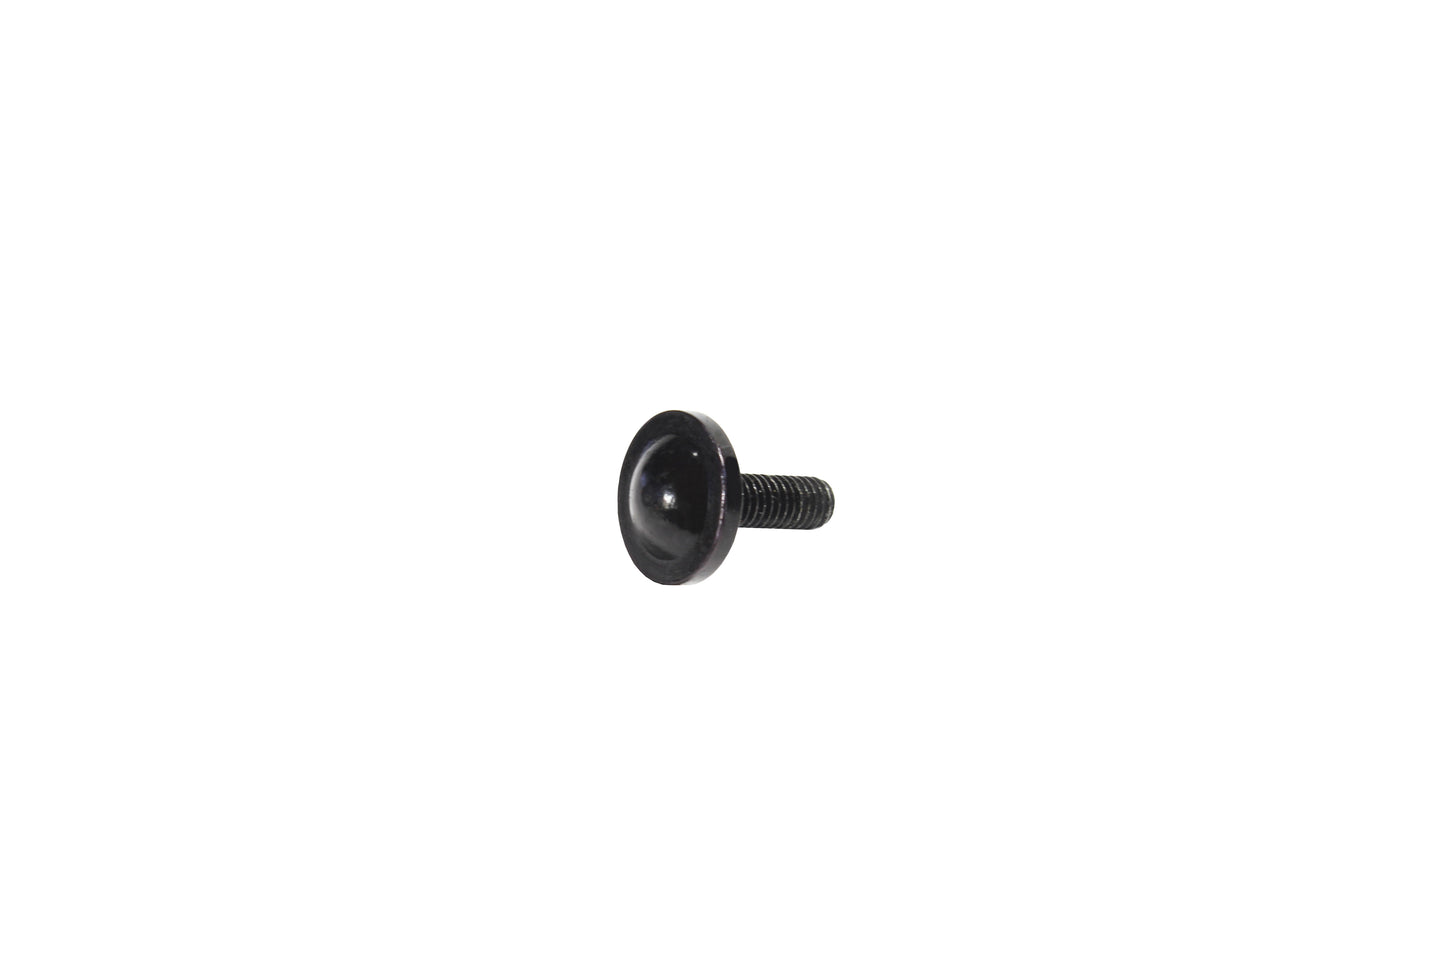 Full Metal AK Universal Selector Switch Rounded Cap Screw Replacement